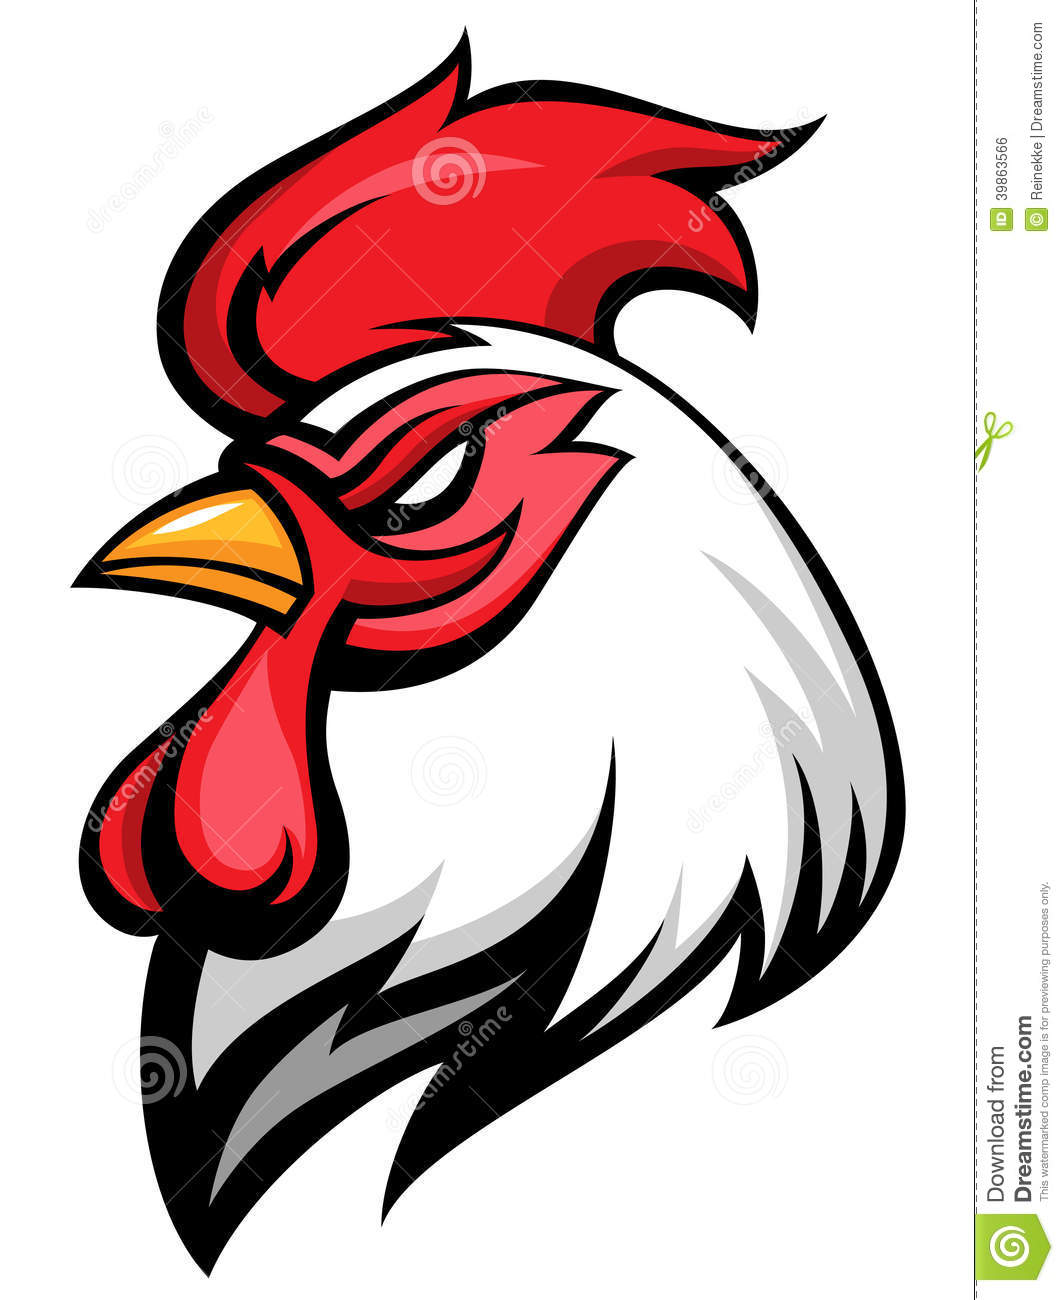 Angry Rooster Mascot Team Symbol Isolated On White 